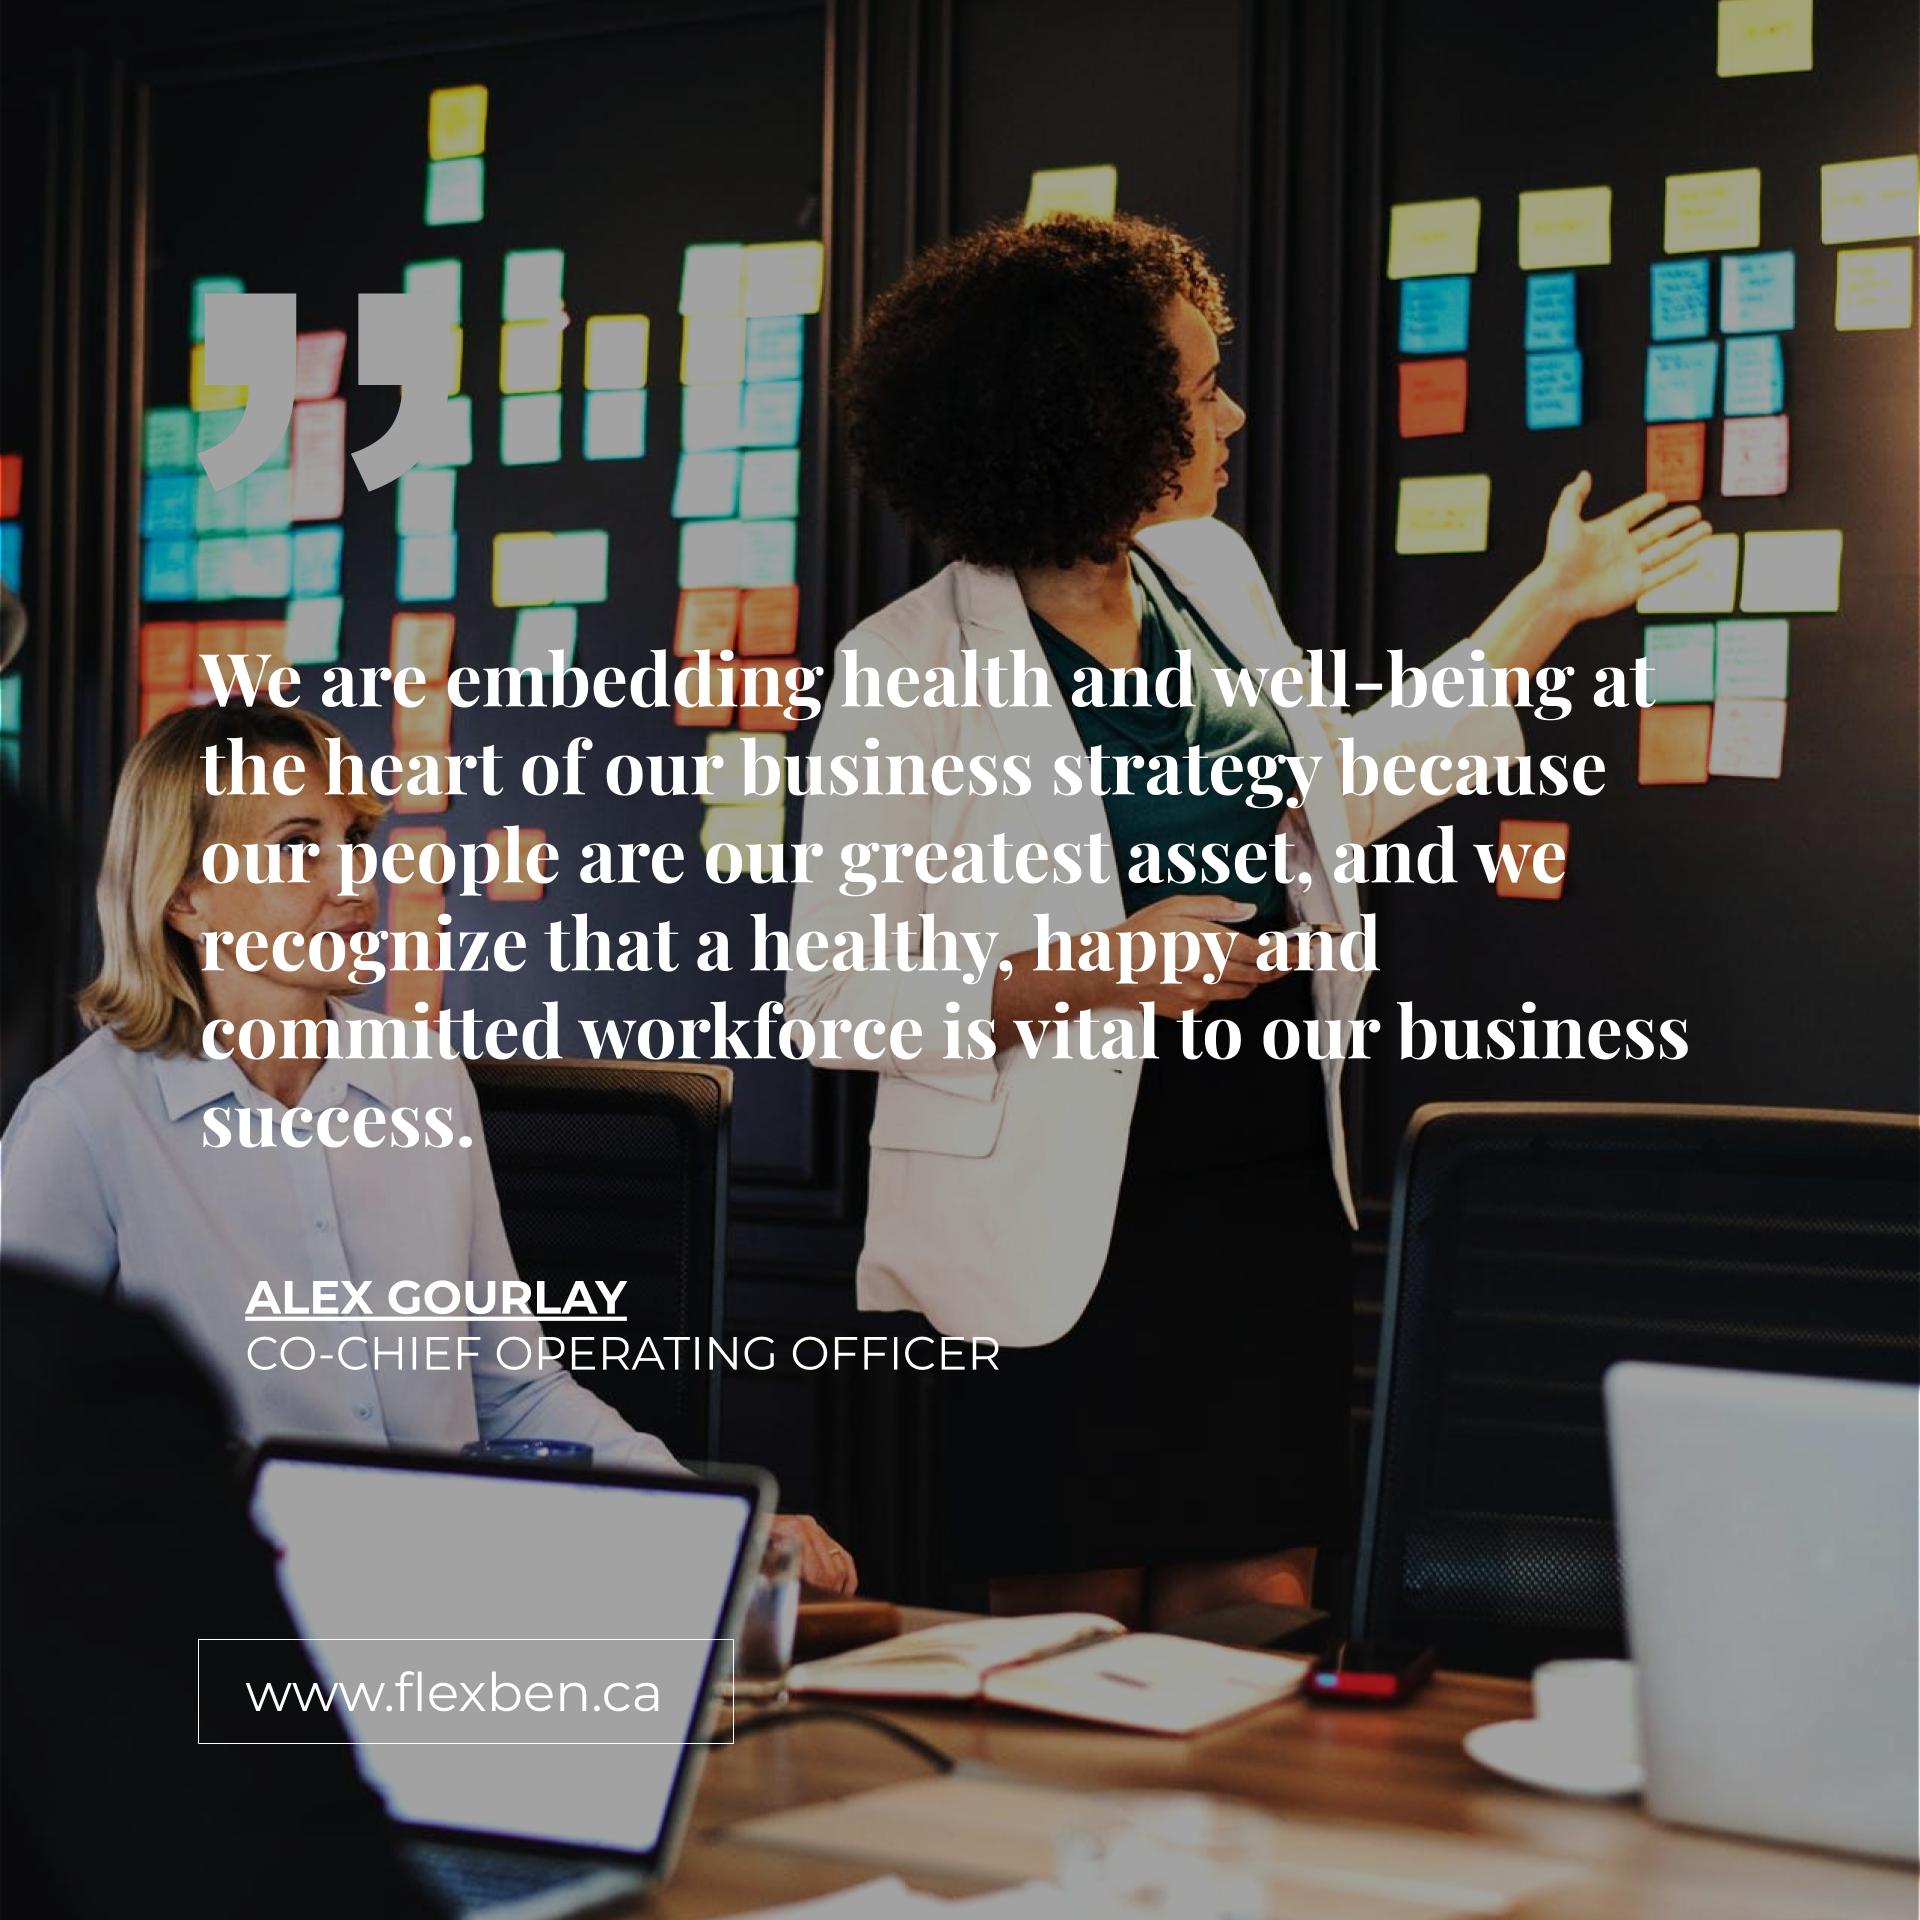 A Healthy, Happy And Committed Workforce Is Vital To Business Success